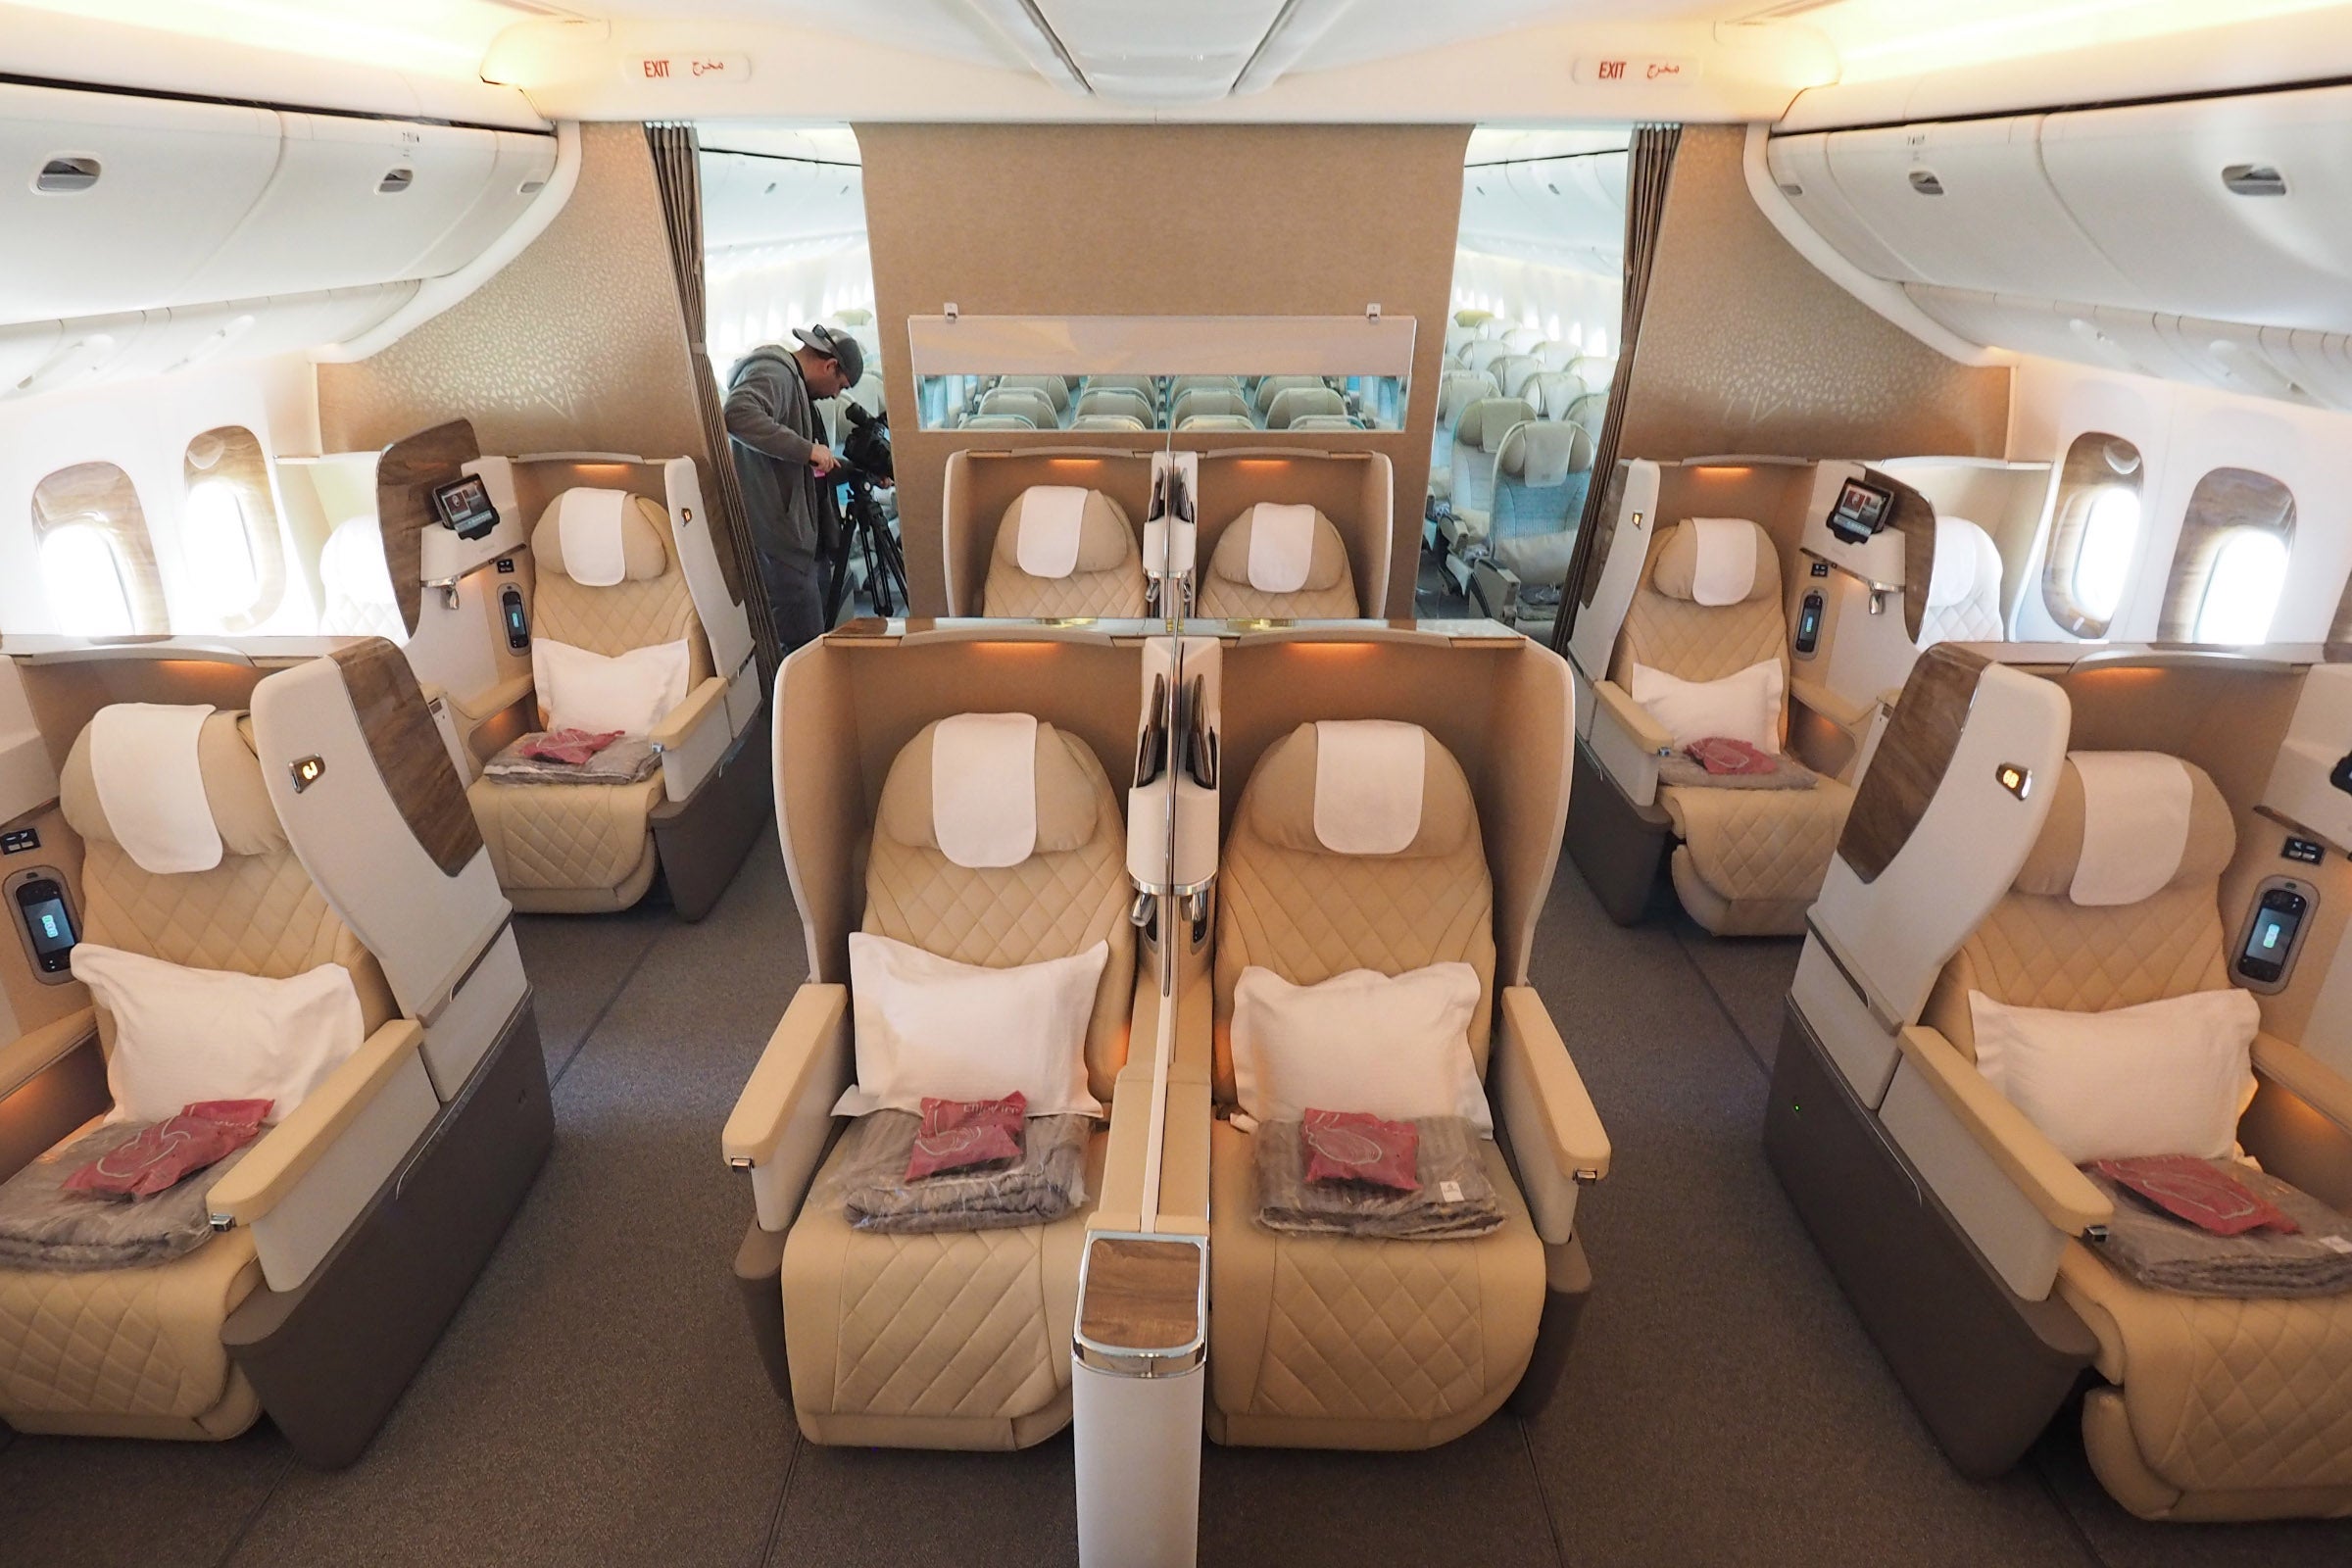 Emirates special offers